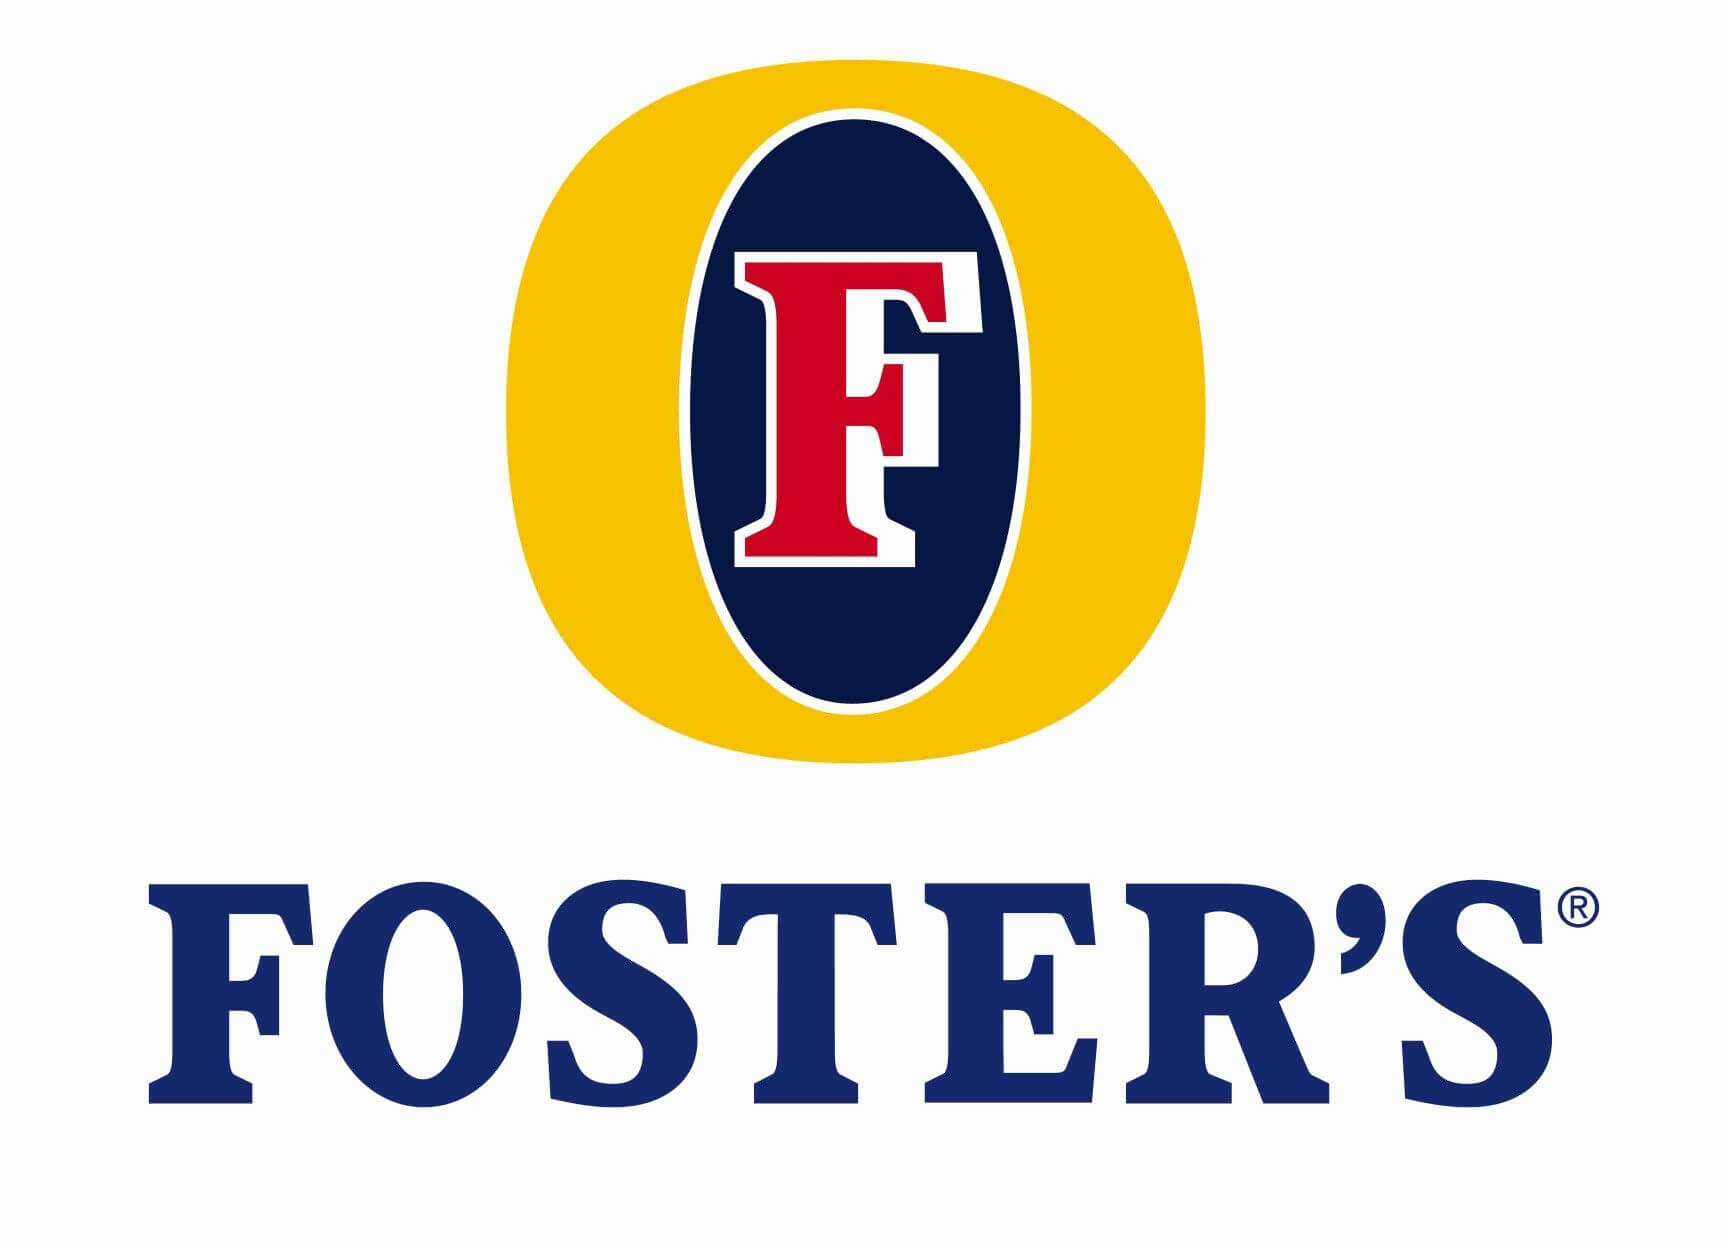 Fosters Brewing